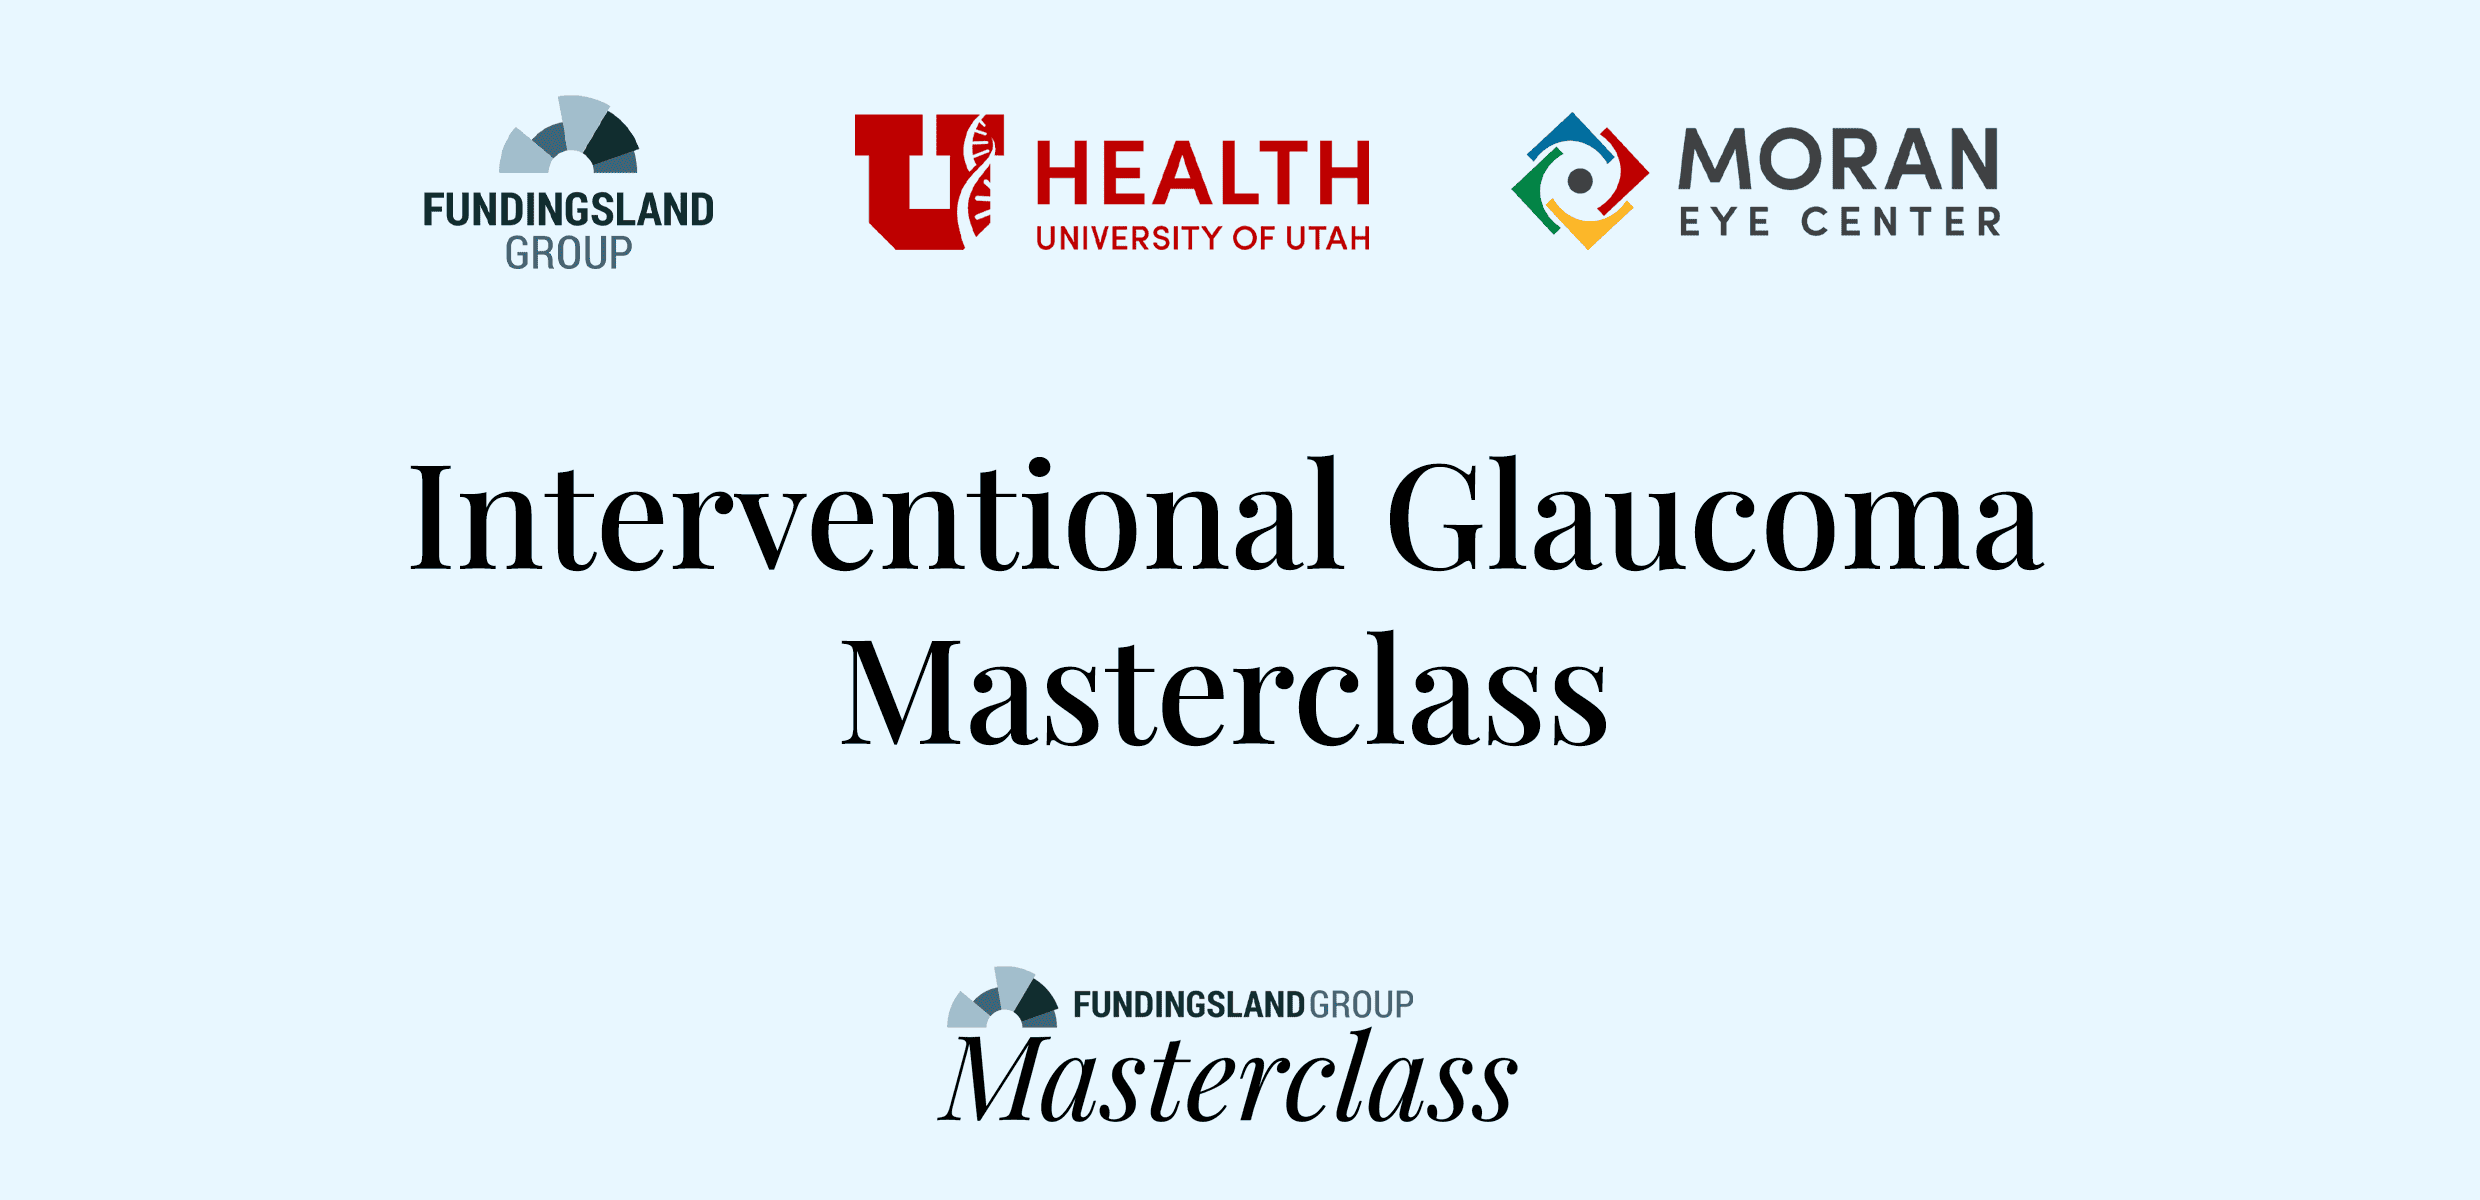 Innovate Your Practice: Interventional Glaucoma Masterclass Applications Open